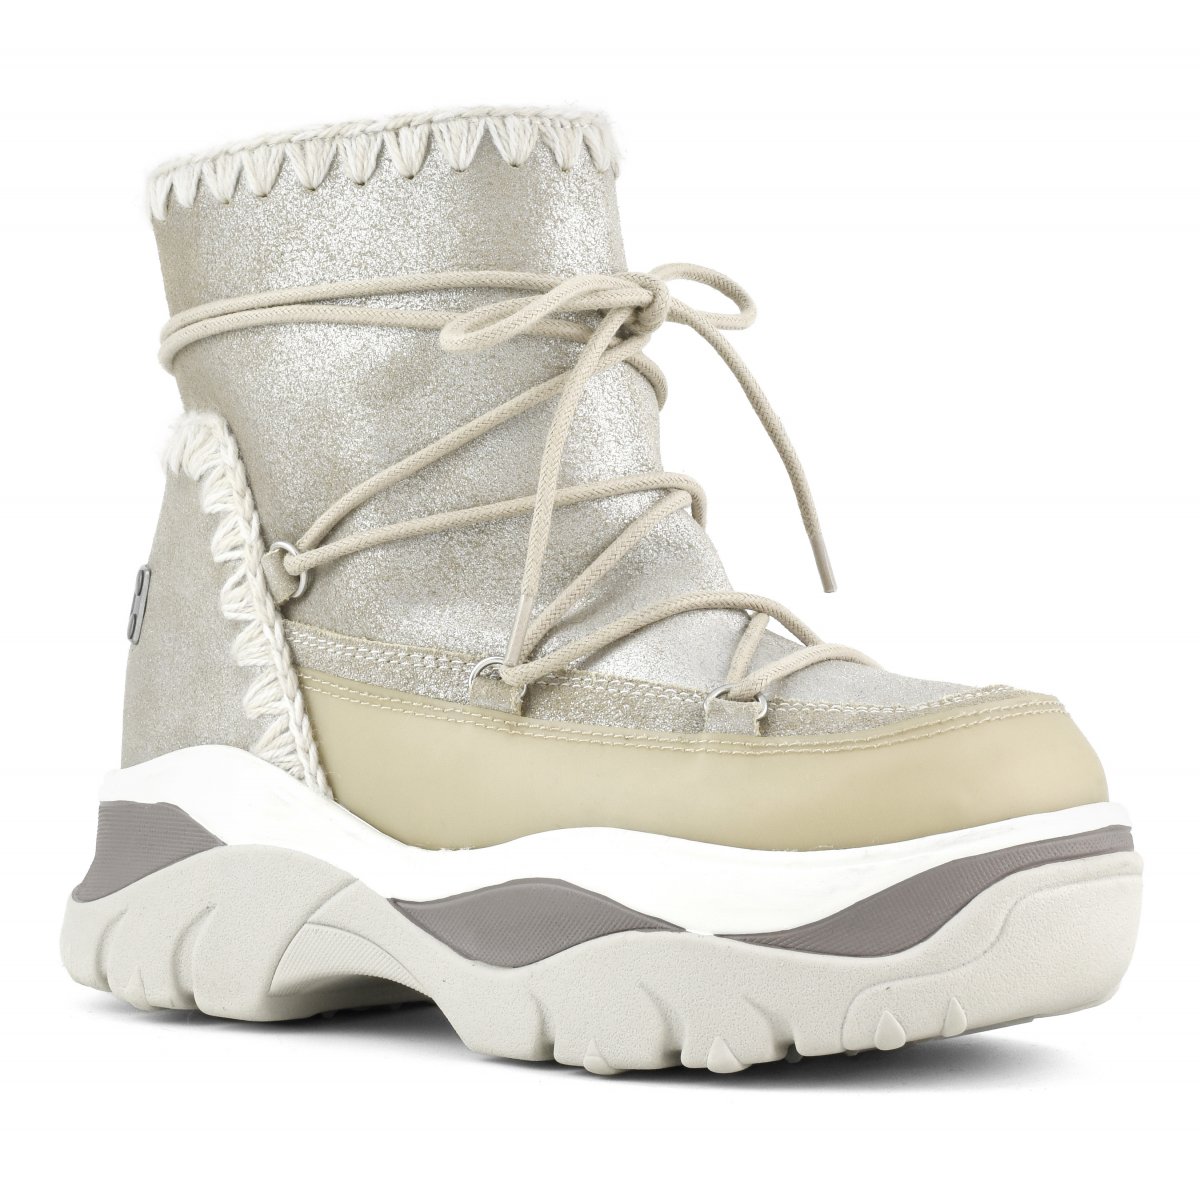 Chunky sneaker lace up boot STME img 2